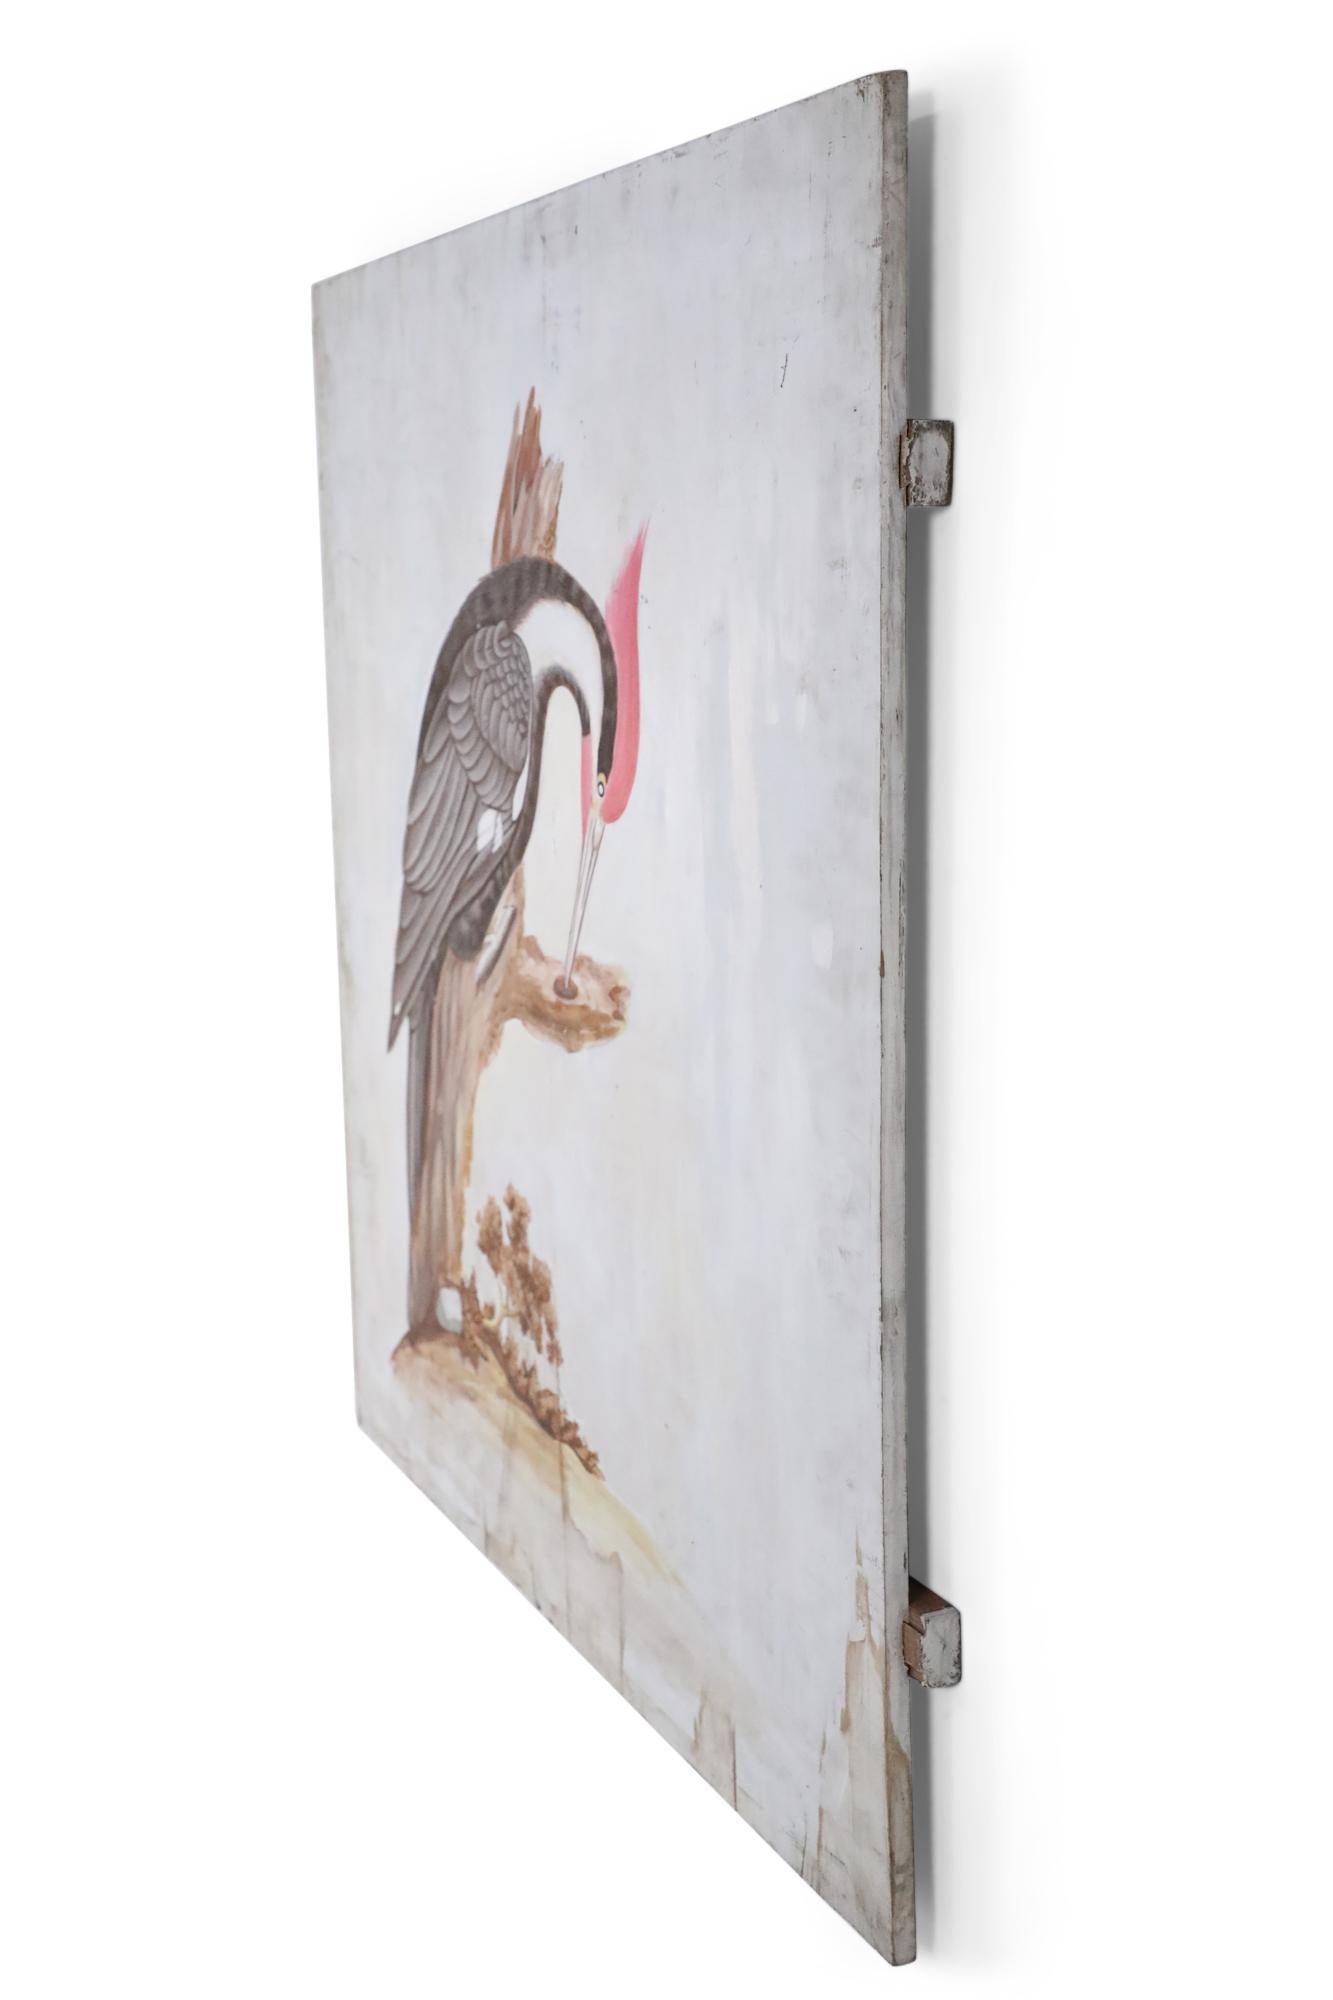 Vintage (20th century) Audubon-style painting of a black and red pileated woodpecker seated on a large stump against a clouded white background, painted on a rustic unfinished plank board.
     